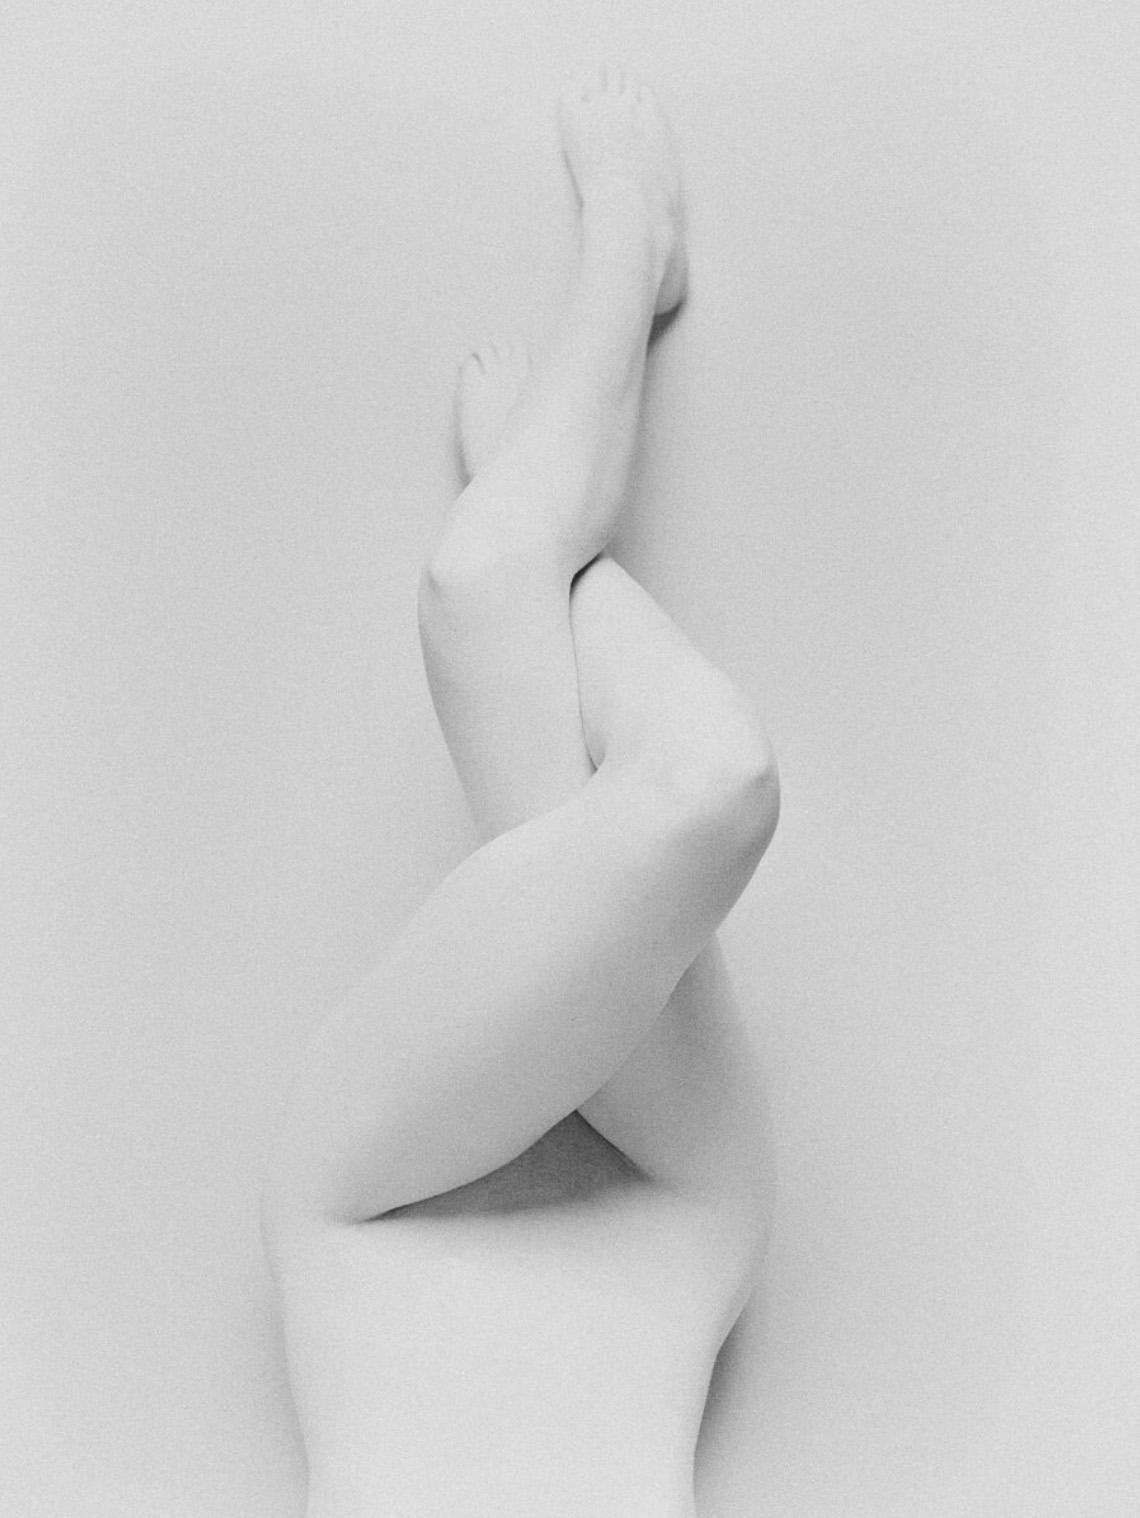 Bastiaan Woudt Black and White Photograph - Twisted